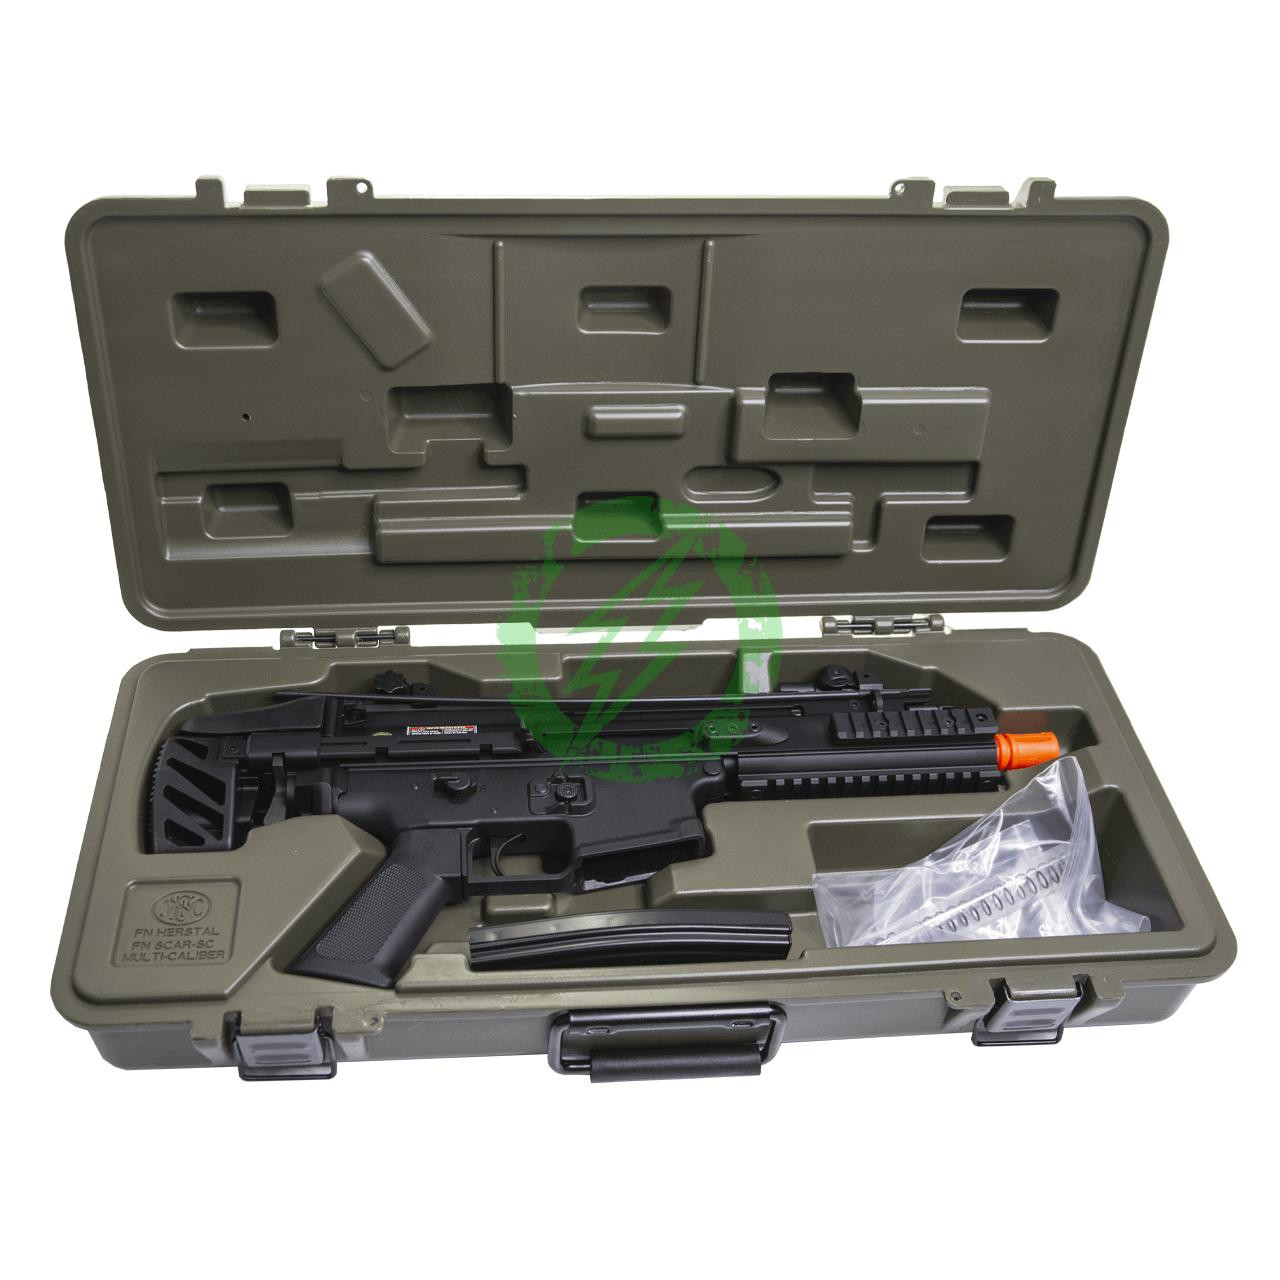  Cybergun FN Herstal Licensed SCAR-SC Compact Airsoft PDW by Ares 